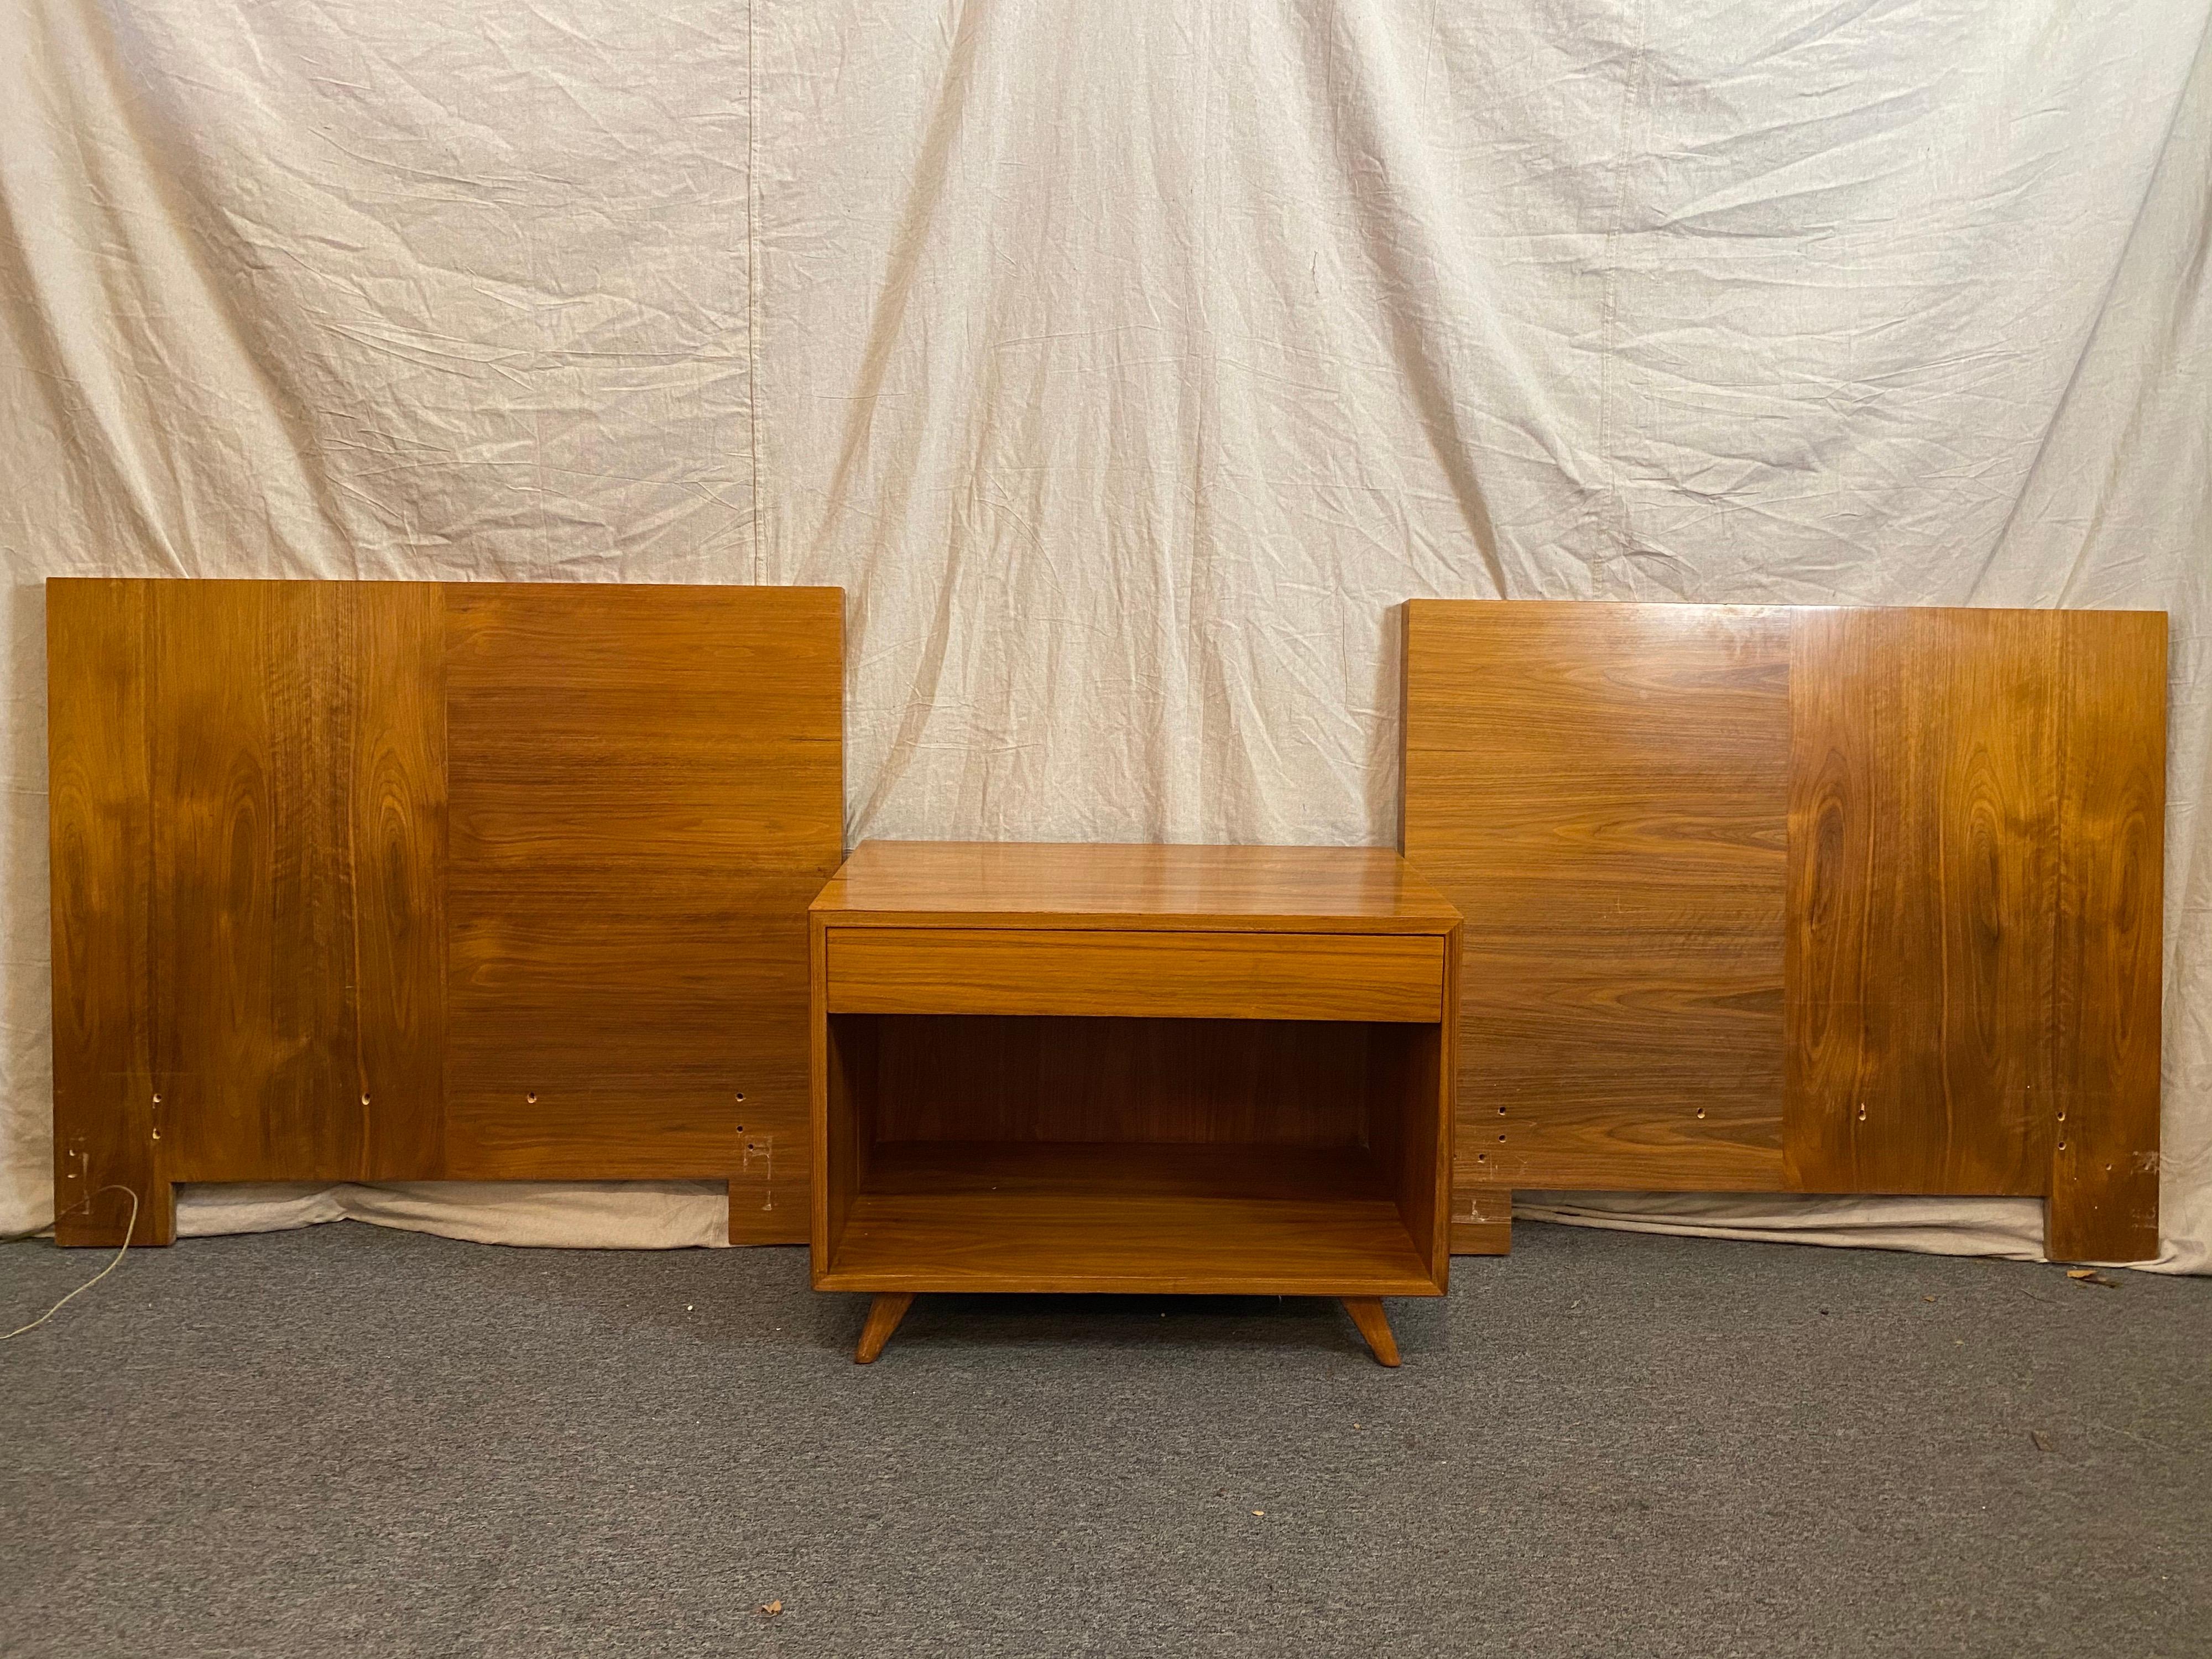 Vladimir Kagan for Kagan Dreyfuss pair of twin headboards/ King headboard with one nightstand. Commissioned in 1954 directly from Kagan Dreyfuss for a New York City Apartment. Alternating Walnut Panels. Nightstand measures: 29.5